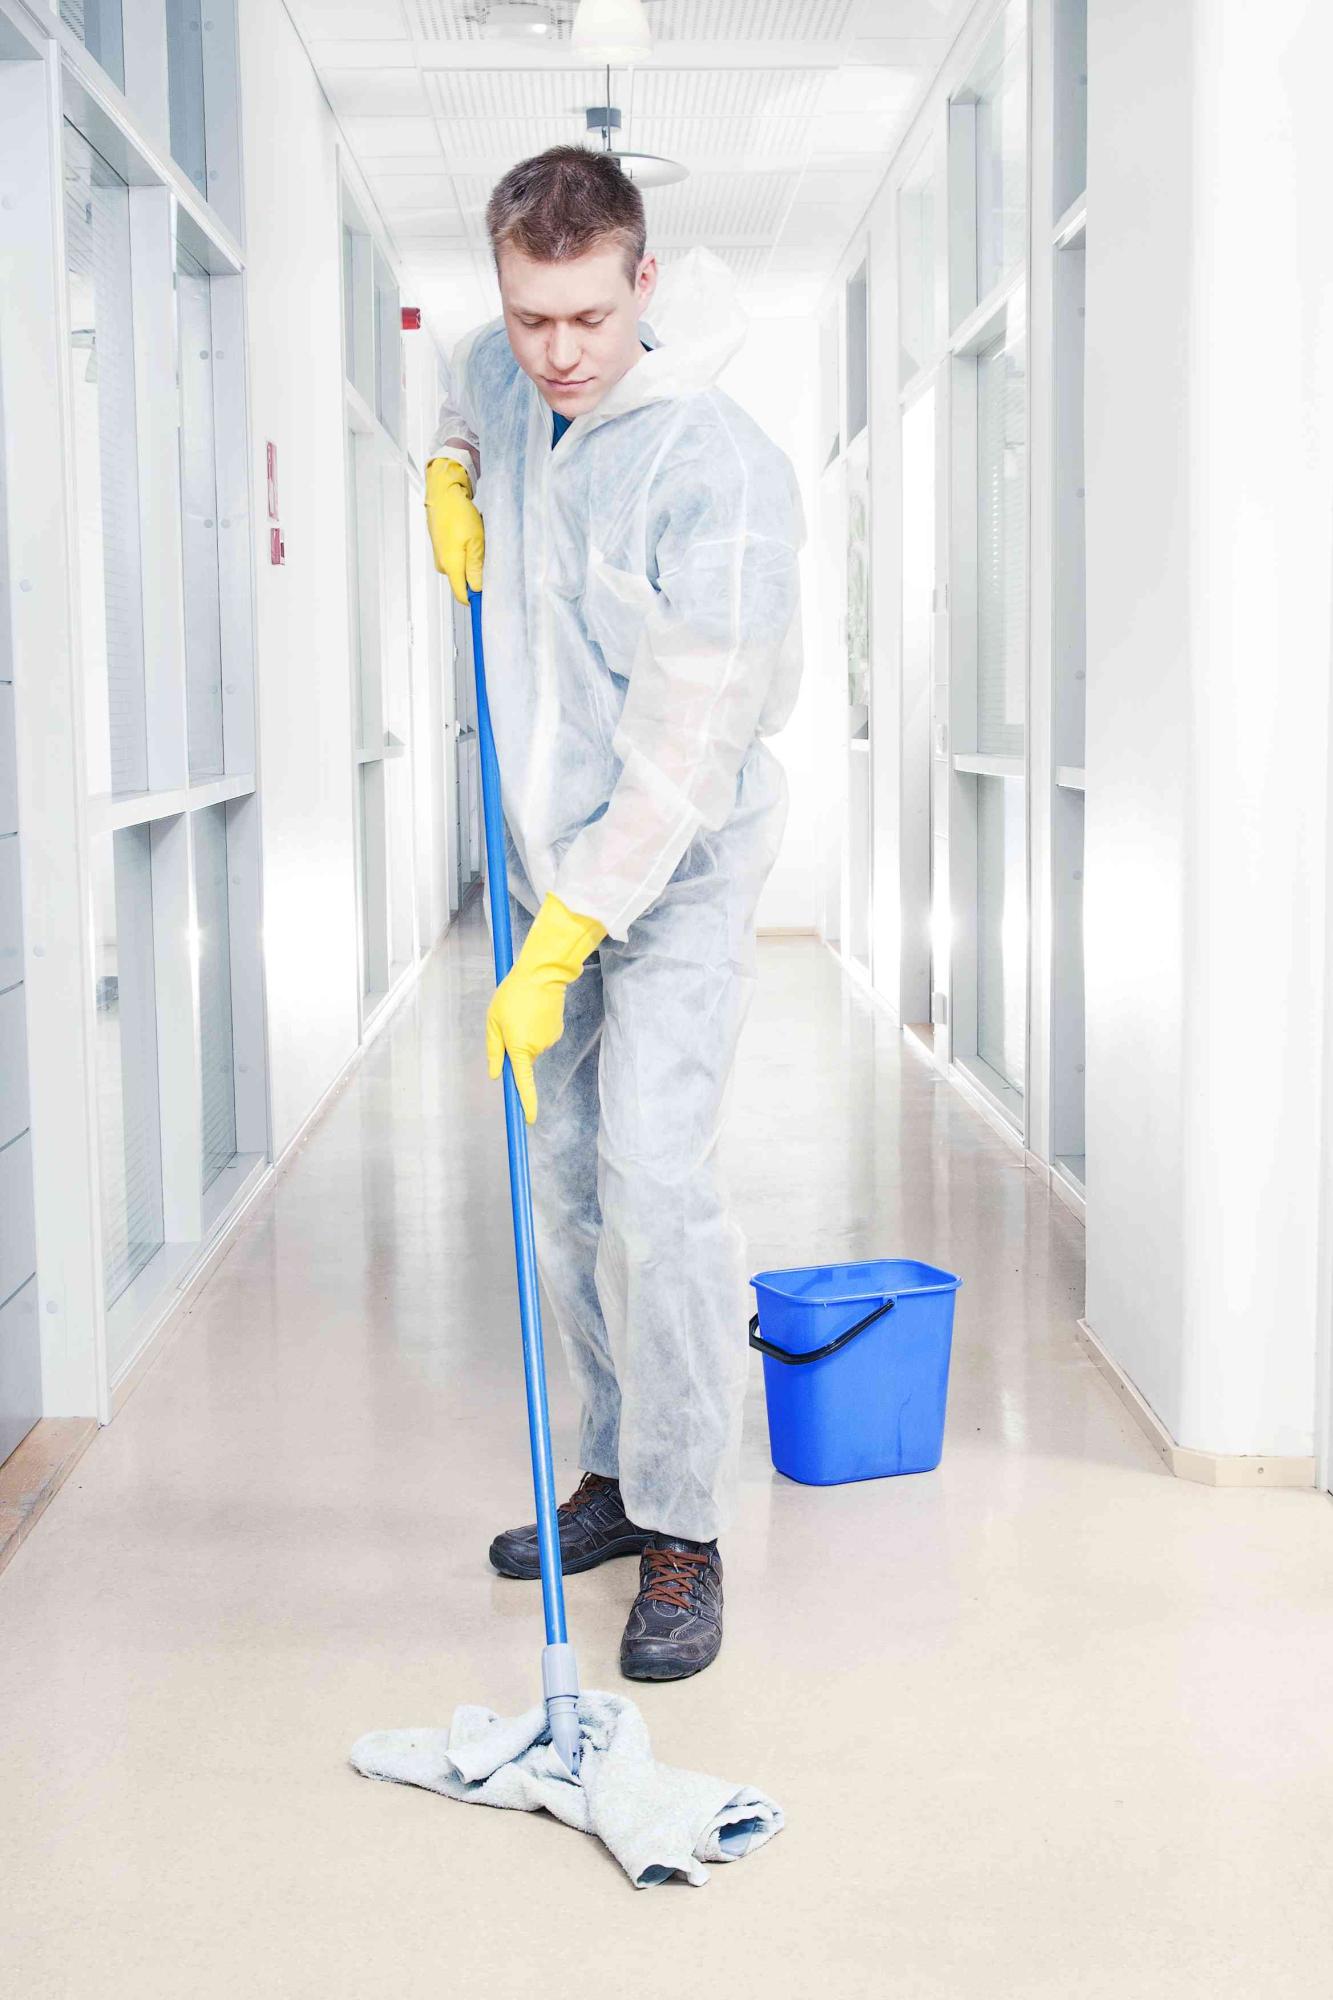 Cleaning office wearing protective overalls